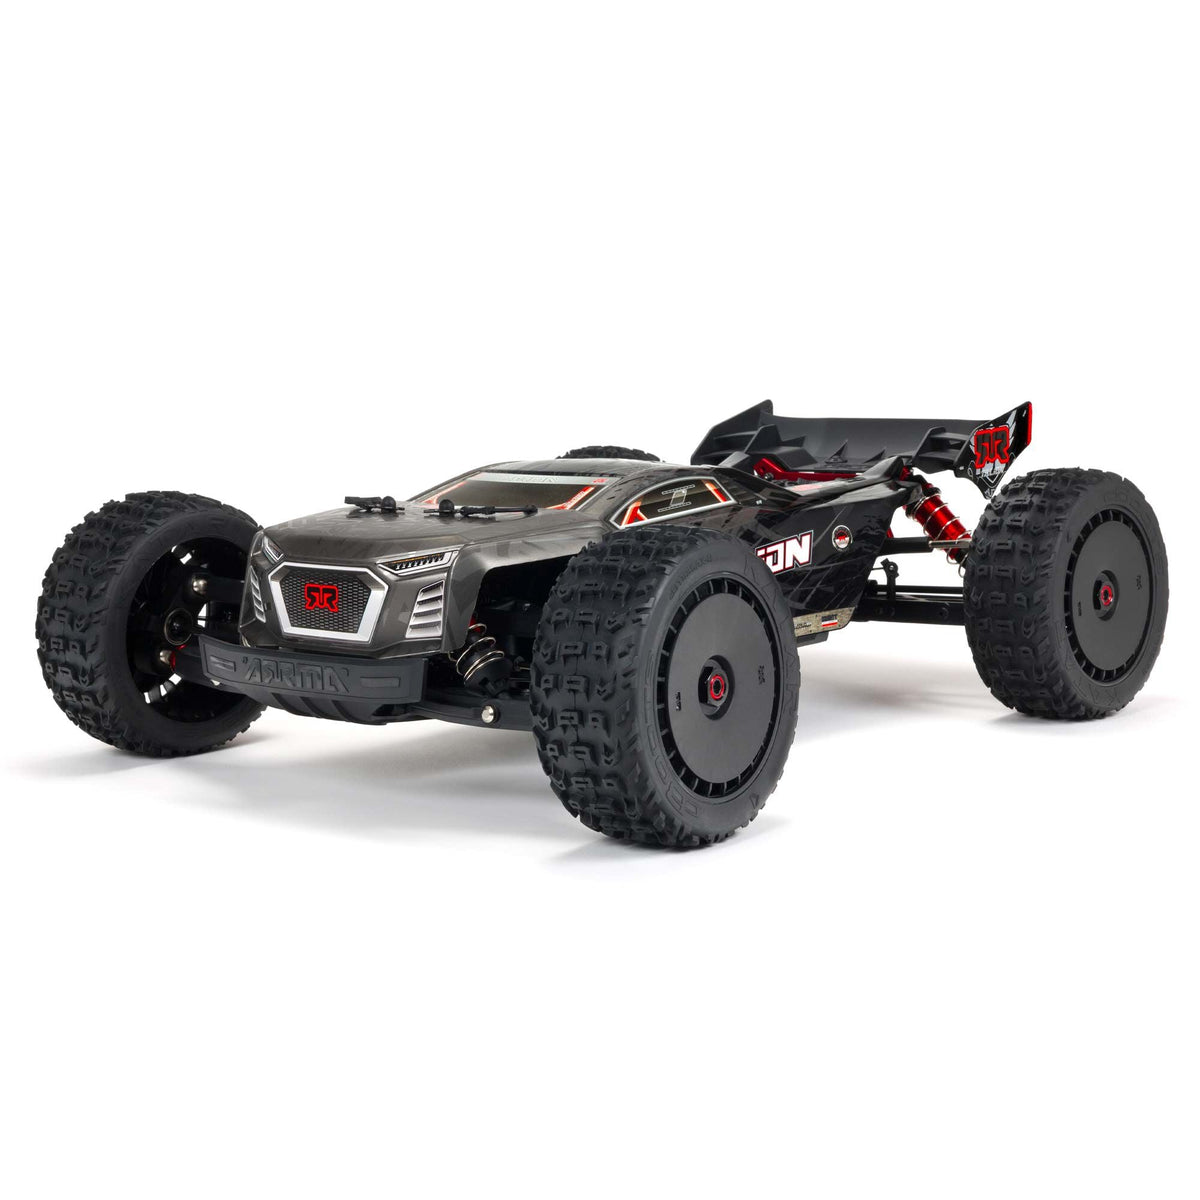 1/8 TALION 6S BLX 4WD EXtreme Bash Speed Truggy RTR, Black - H y p e z RC